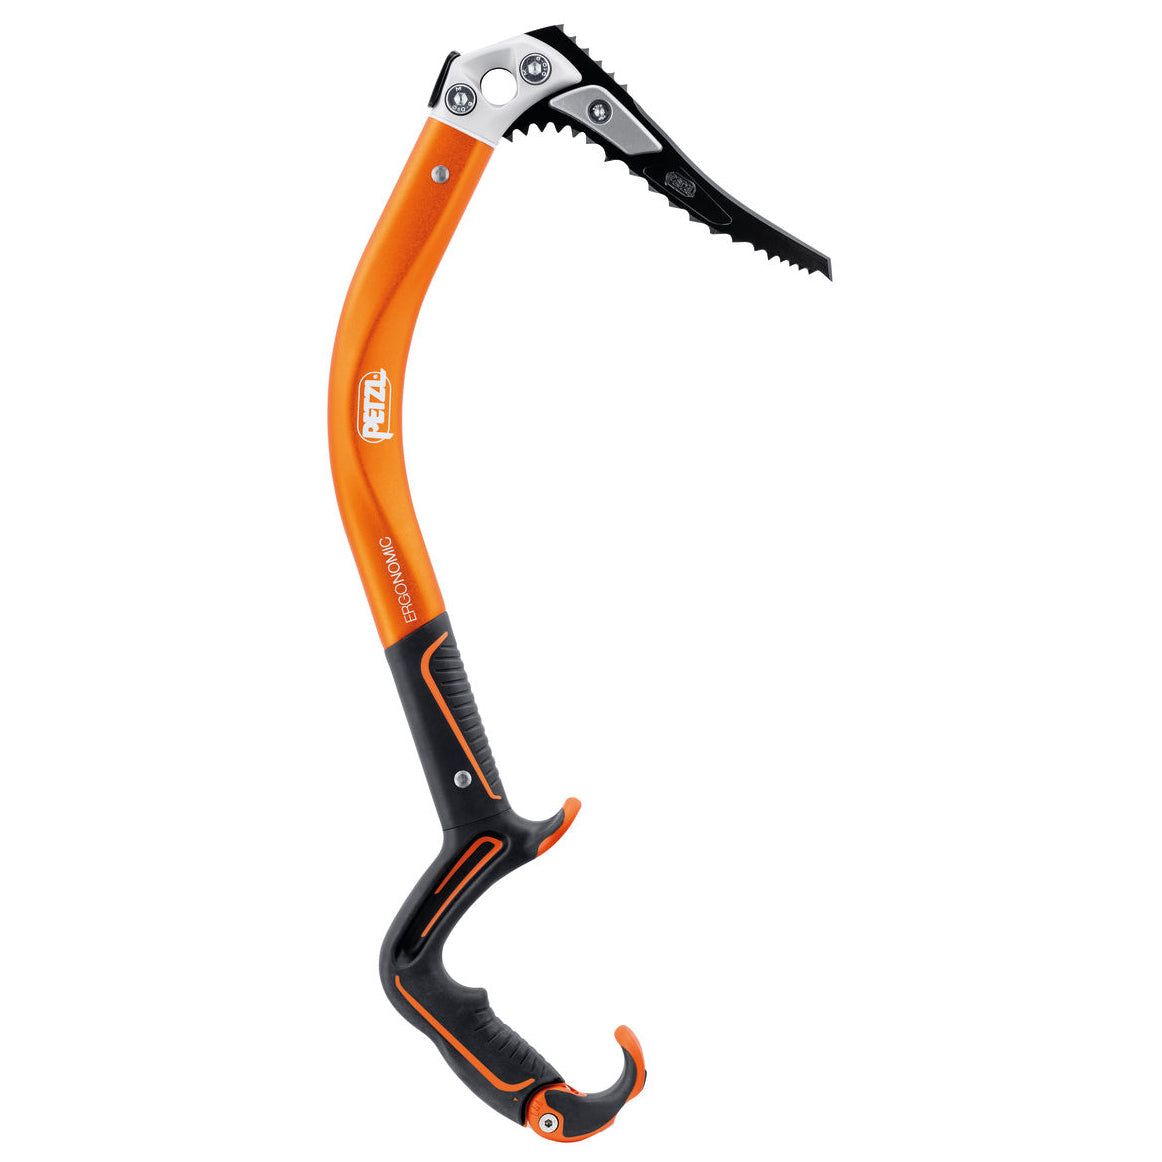 Petzl Ergonomic Ice Axe, side view shown in orange and black colours